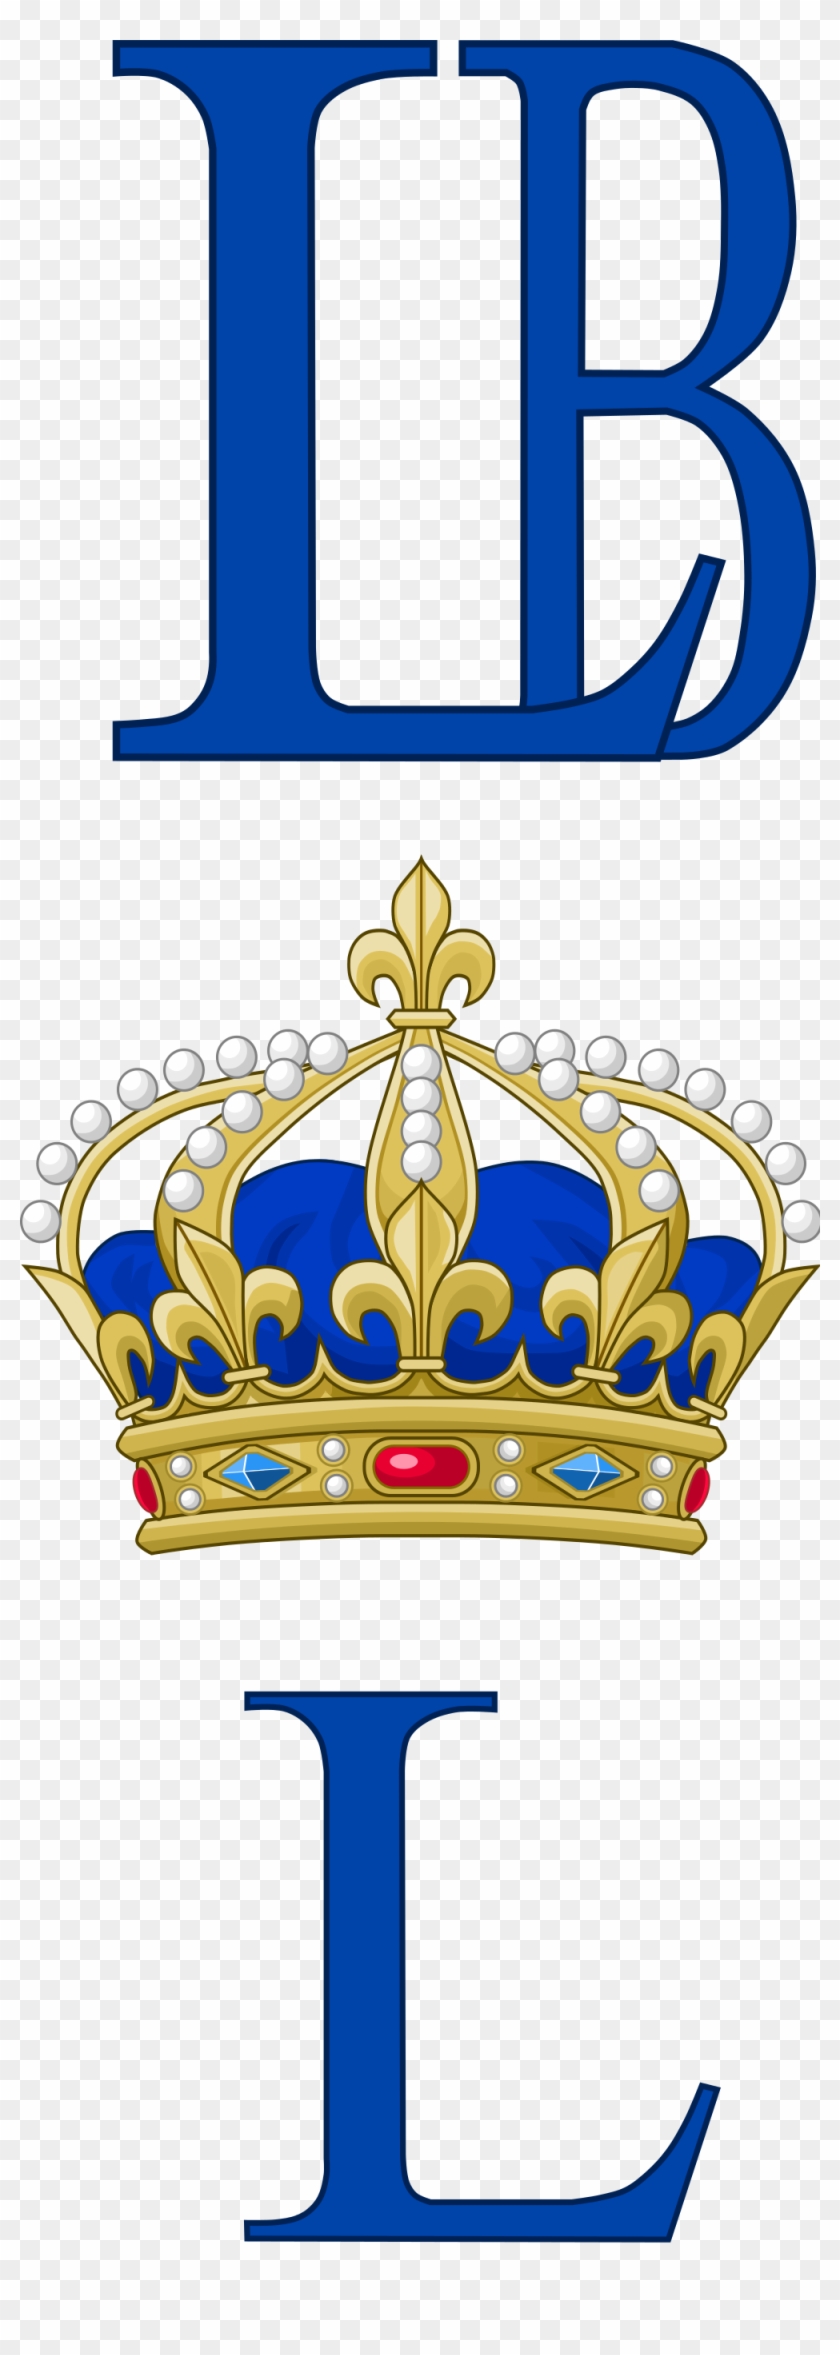 French Royalist Flag Using an Emblem of Louis XIV, the Sun King :  r/vexillology